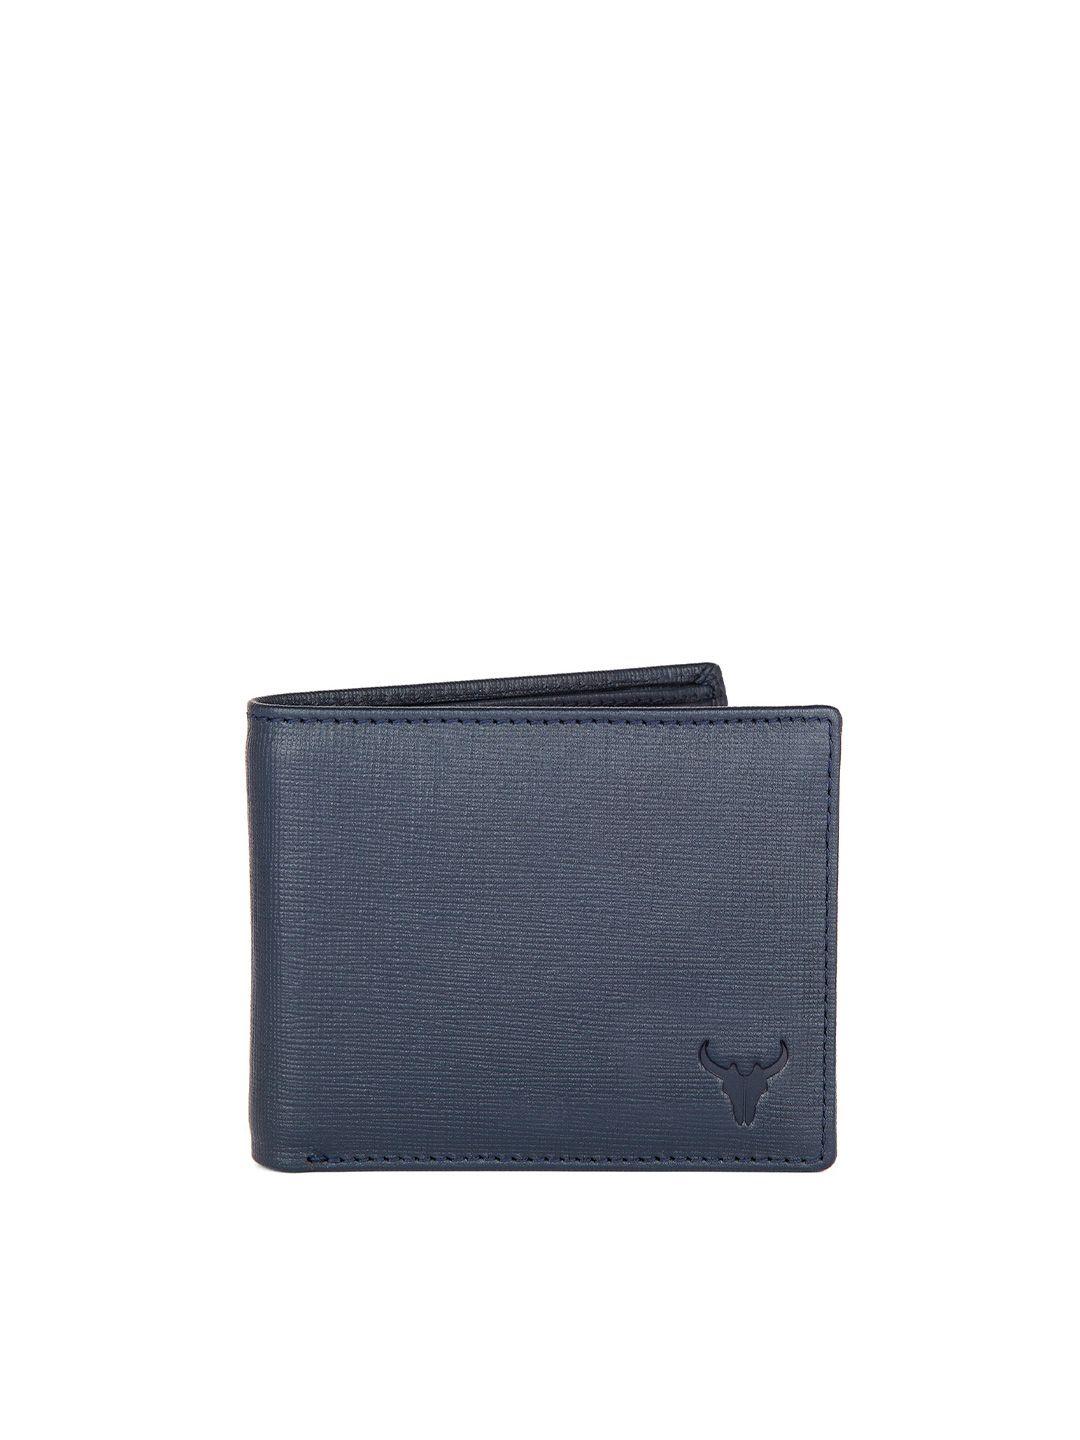 napa hide men blue leather rfid solid two fold wallet